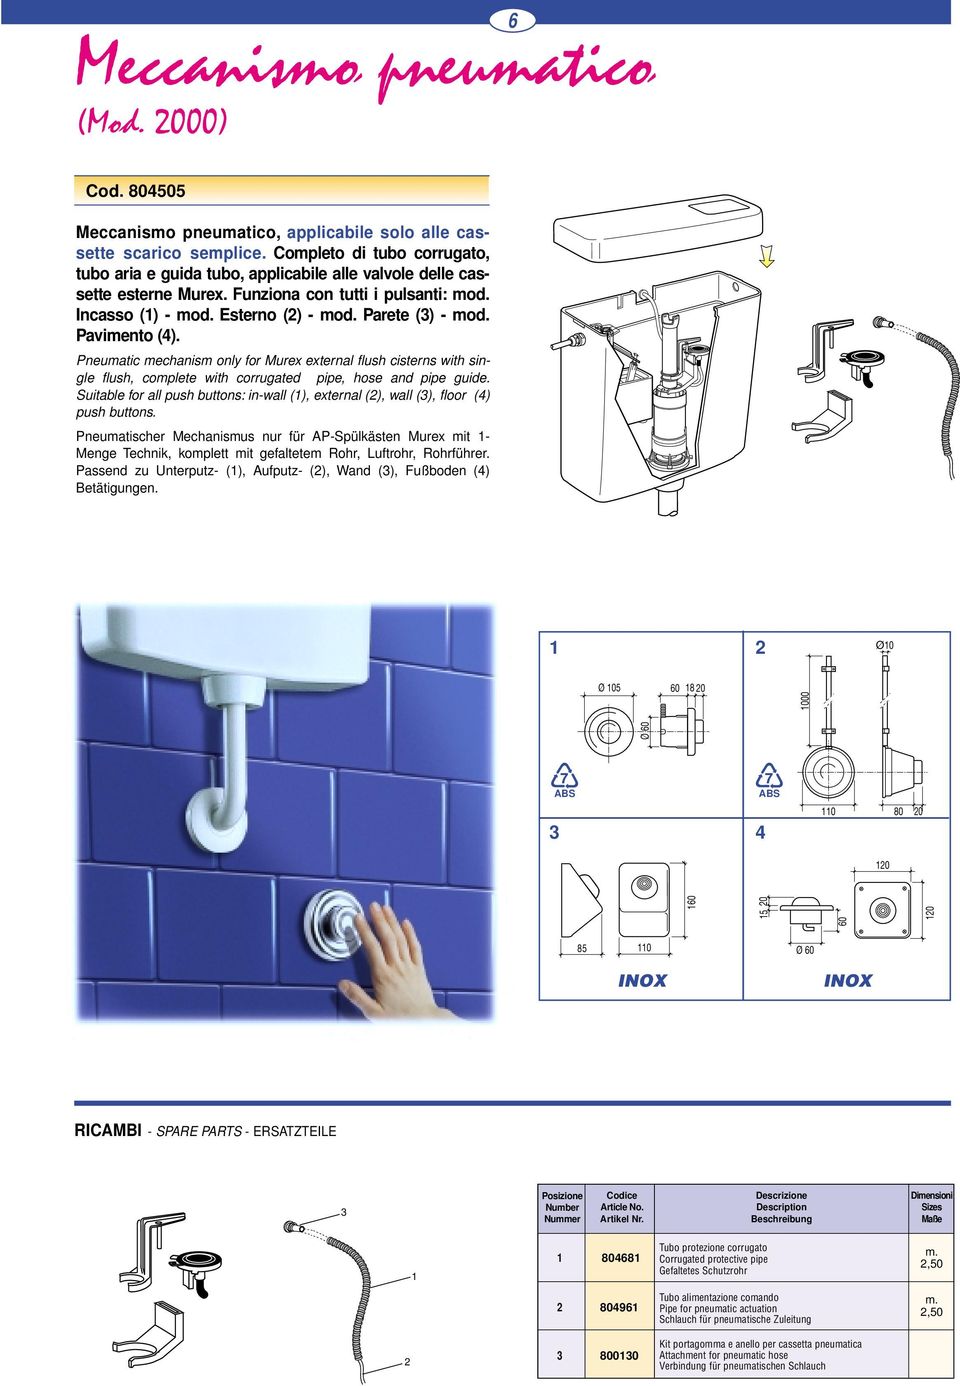 Pavimento (4). Pneumatic mechanism only for Murex external flush cisterns with single flush, complete with corrugated pipe, hose and pipe guide.